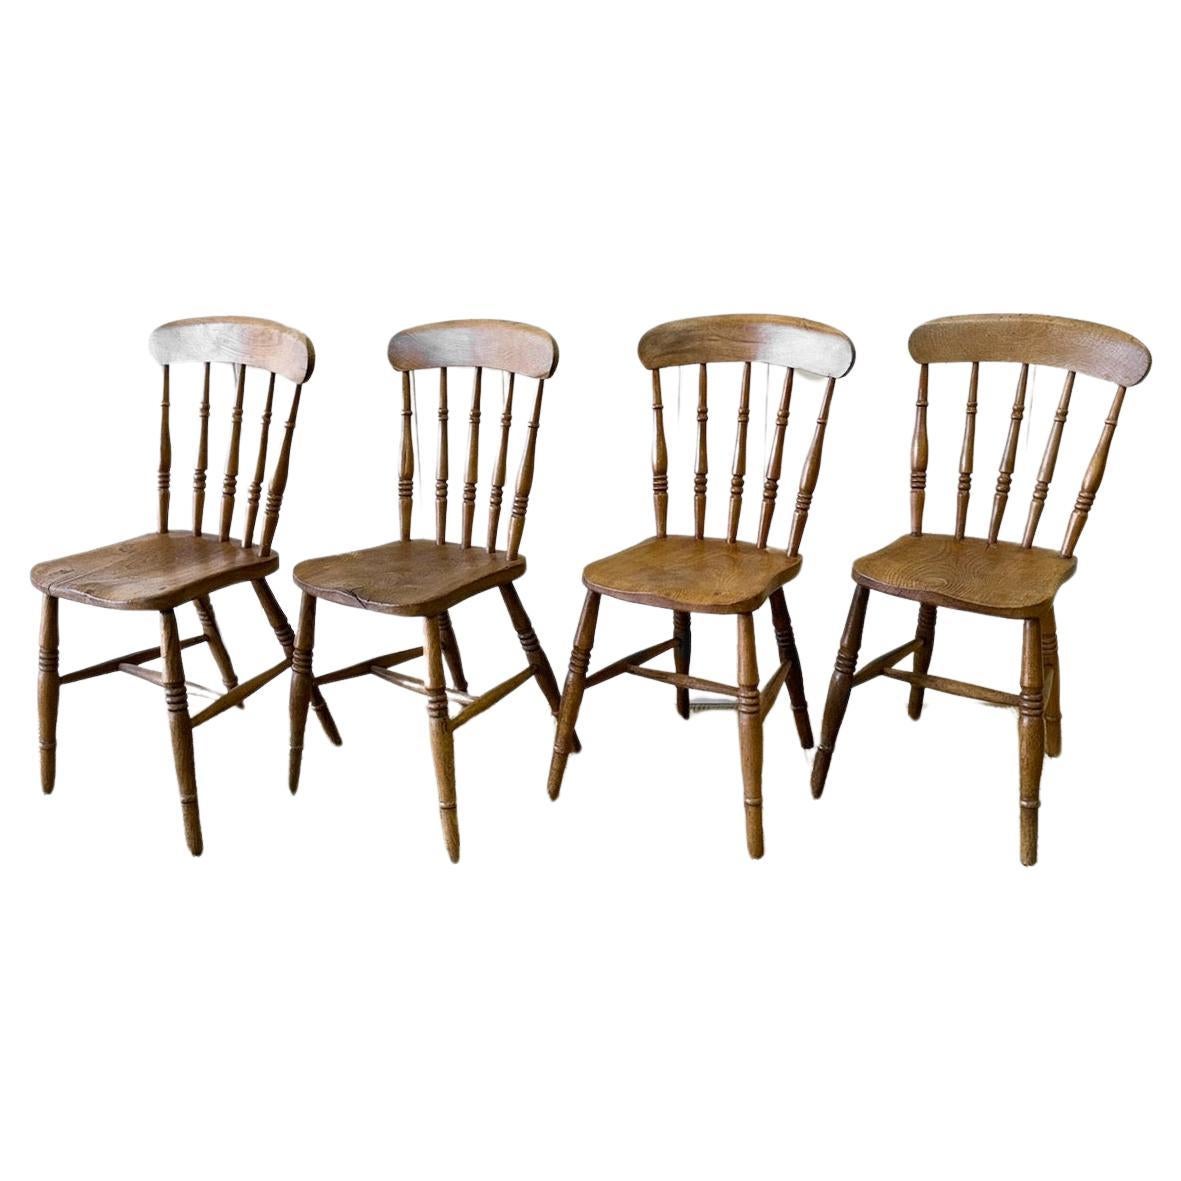 An Antique Set of 4 Spindle Back Chairs